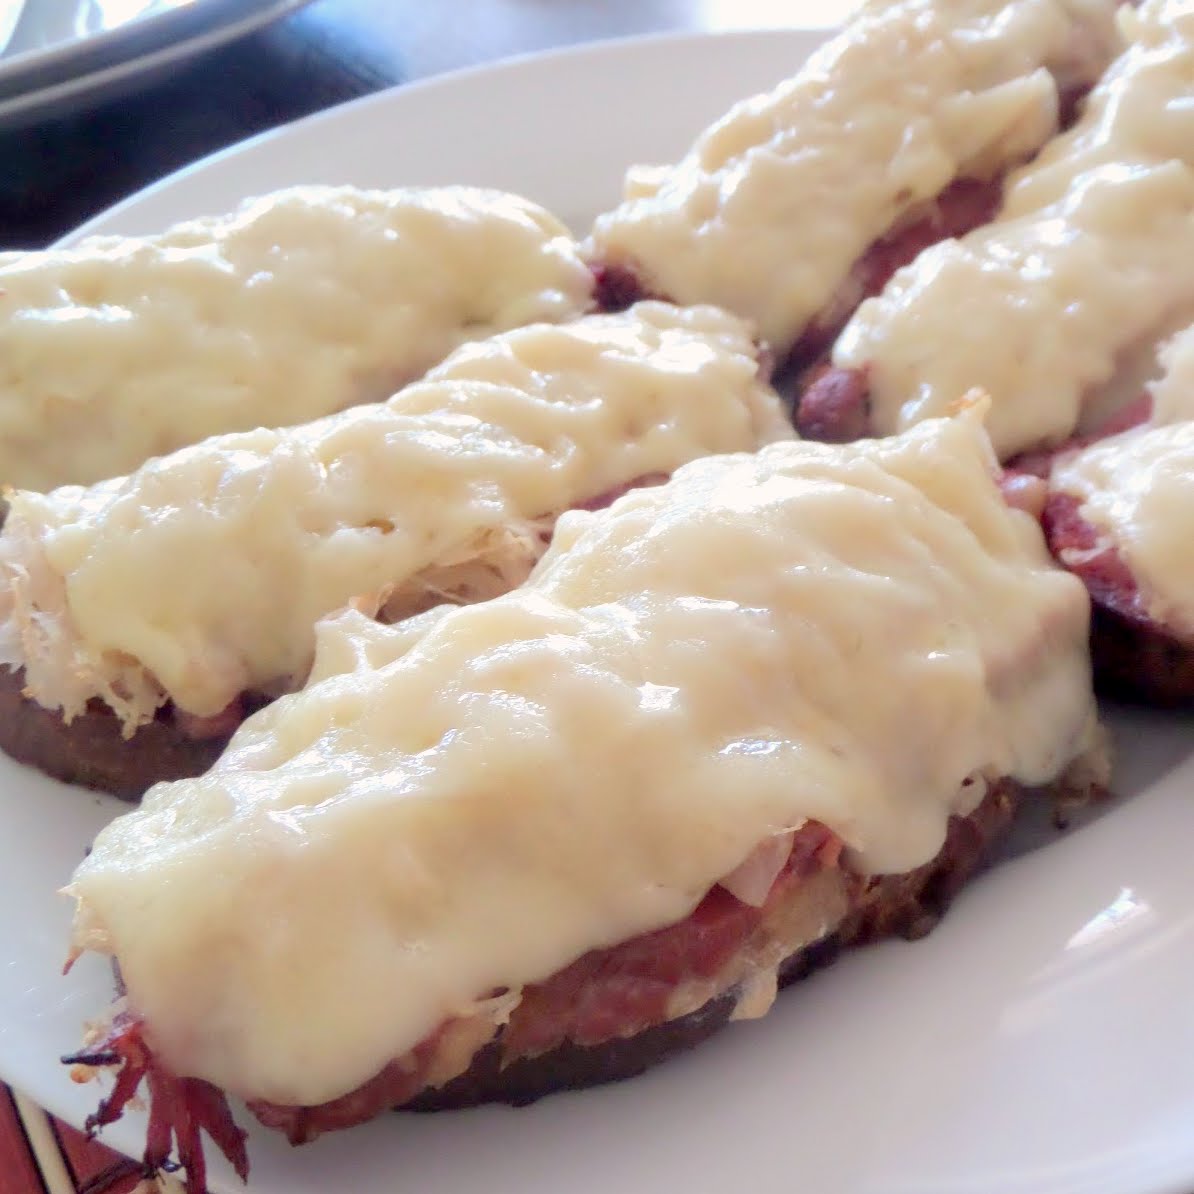 Open Faced Reuben Melts:  All your favorite Reuben ingredients piled on crostini and ready for a quick meal, appetizer, or football snack.